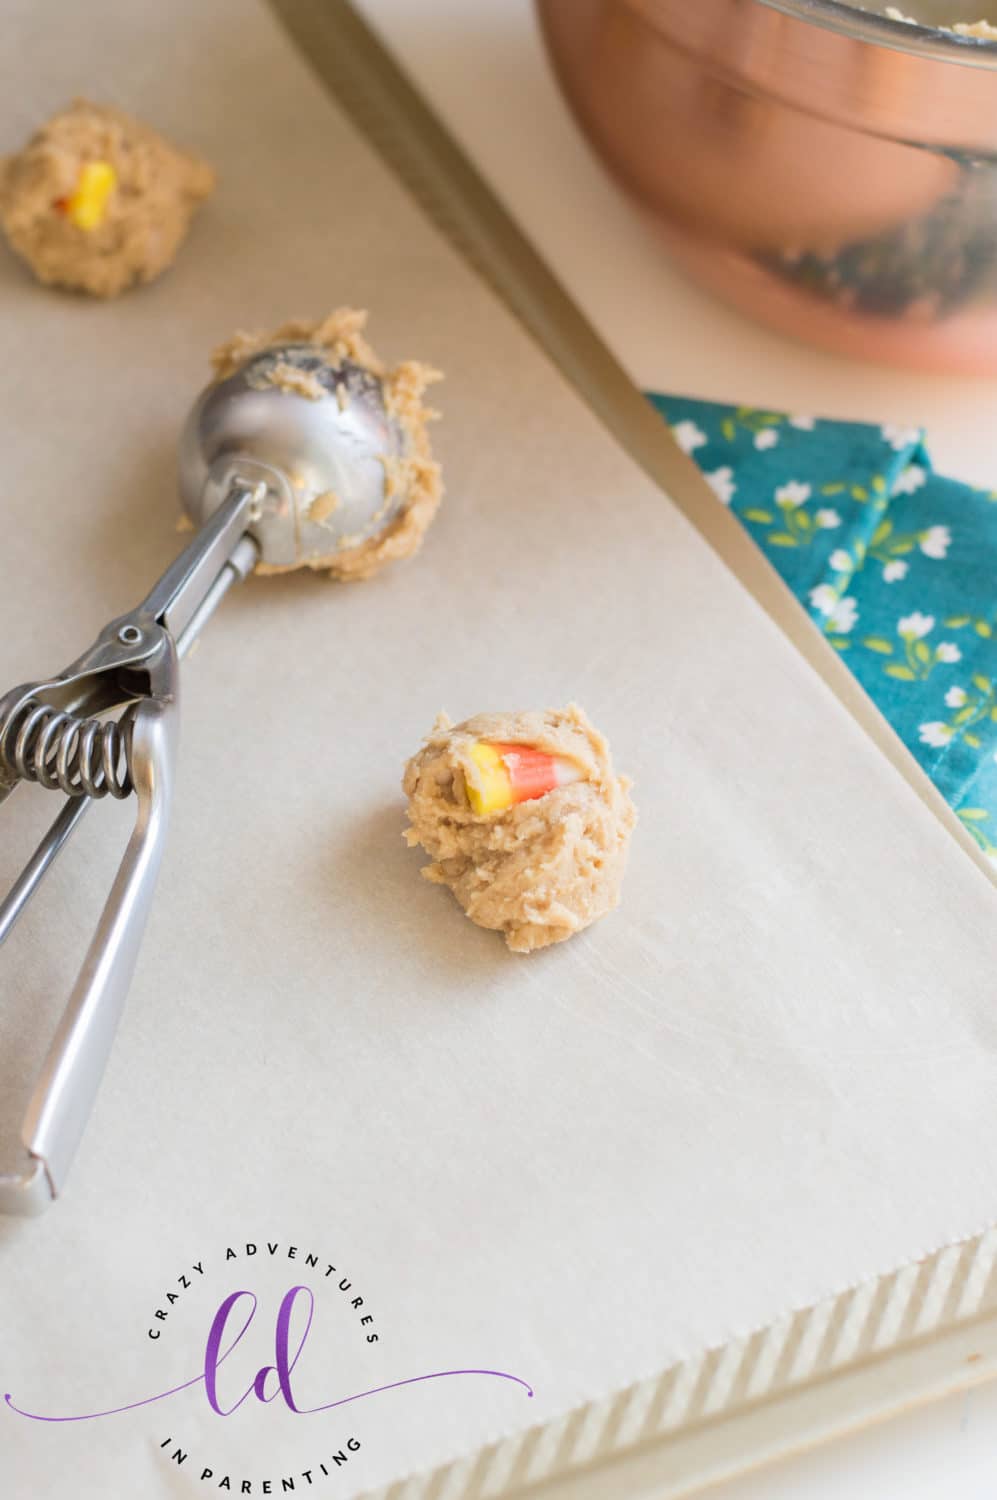 Drop Spoonfuls of Cookie Batter onto Baking Sheet to Make Candy Corn Peanut Butter Cookies